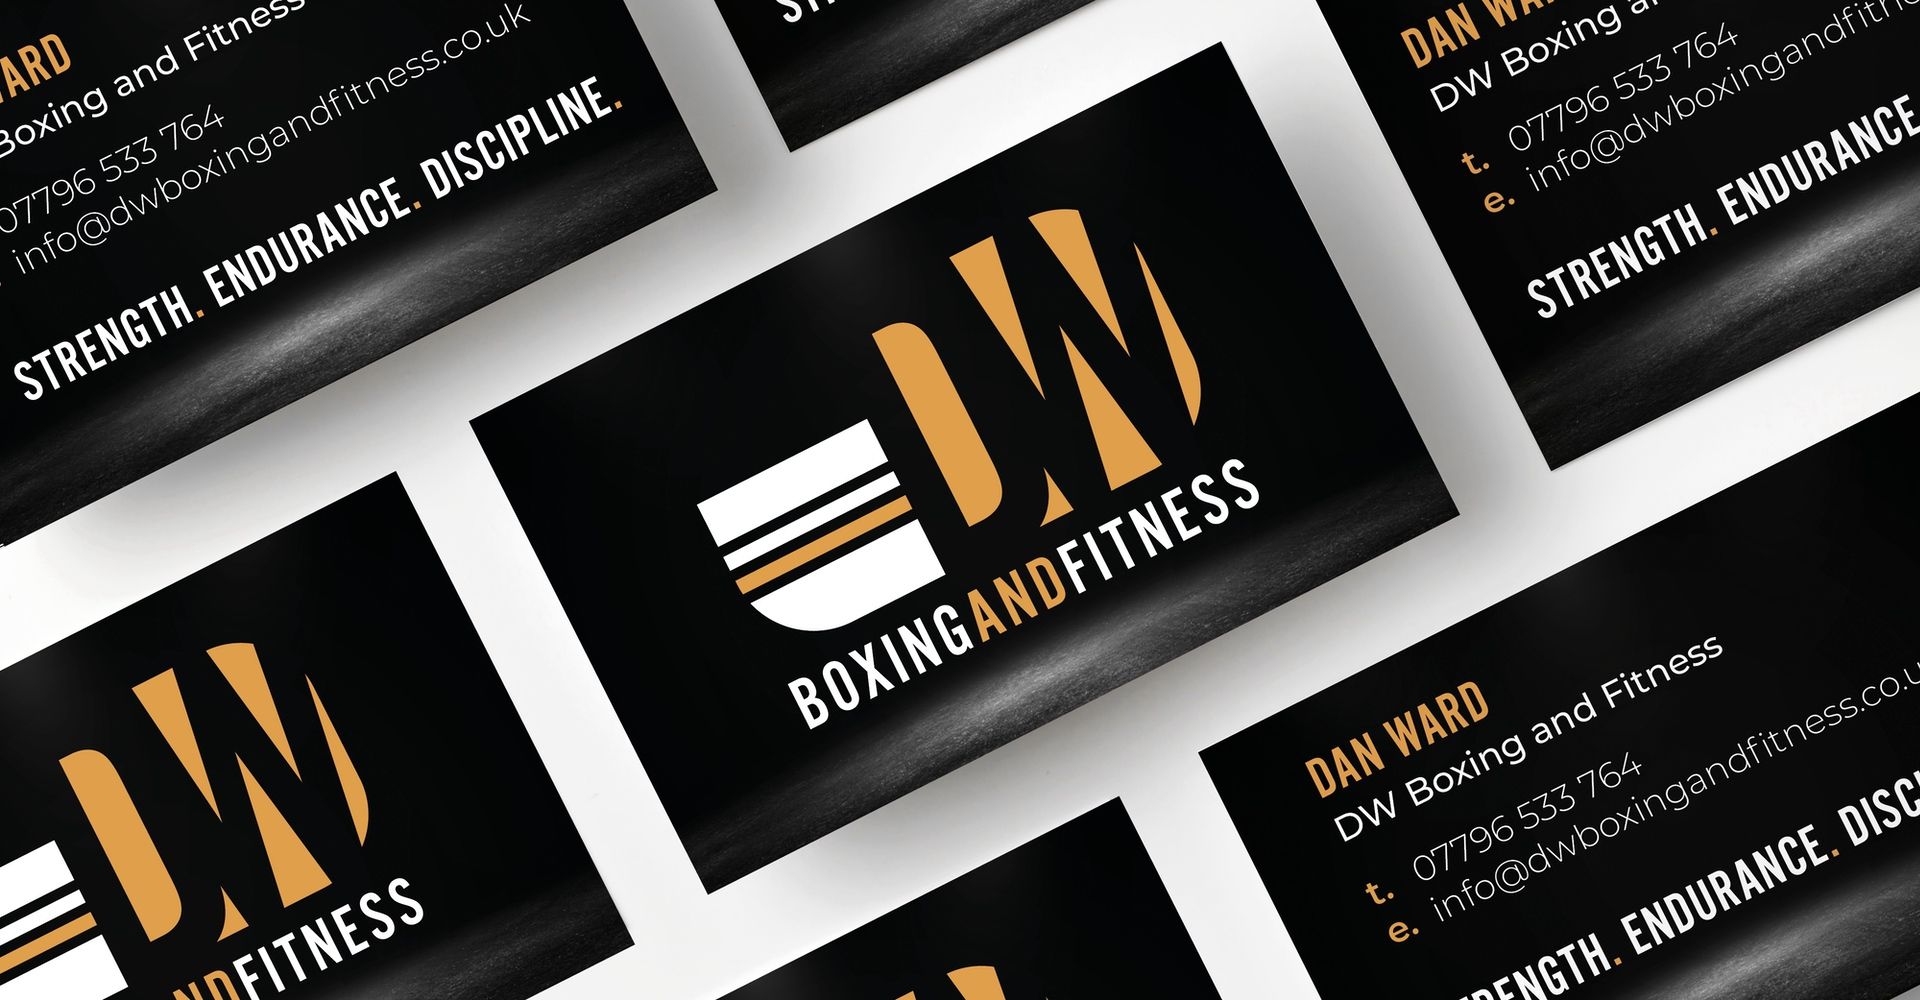 DW Boxing and Fitness business cards collage.